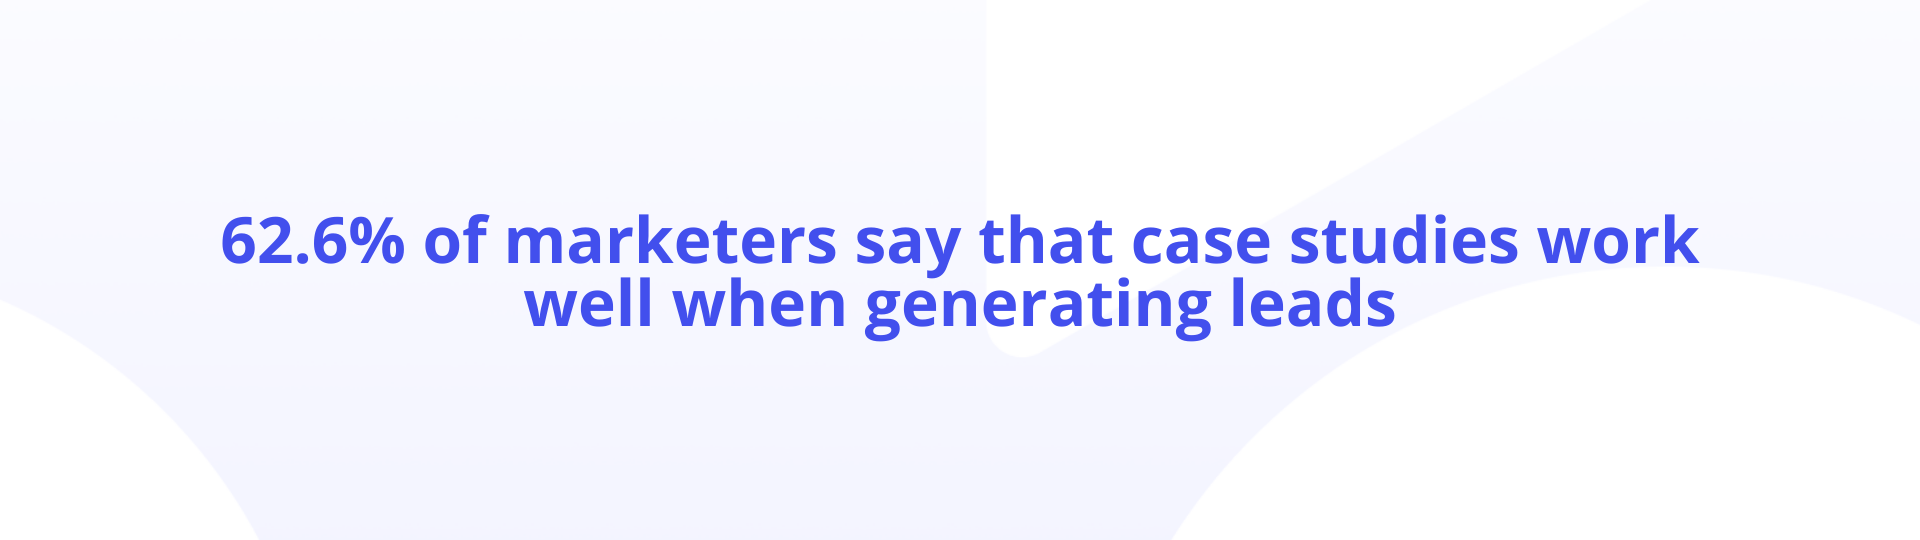 62.6% of marketers say that case studies work well when generating leads - Agency Jet